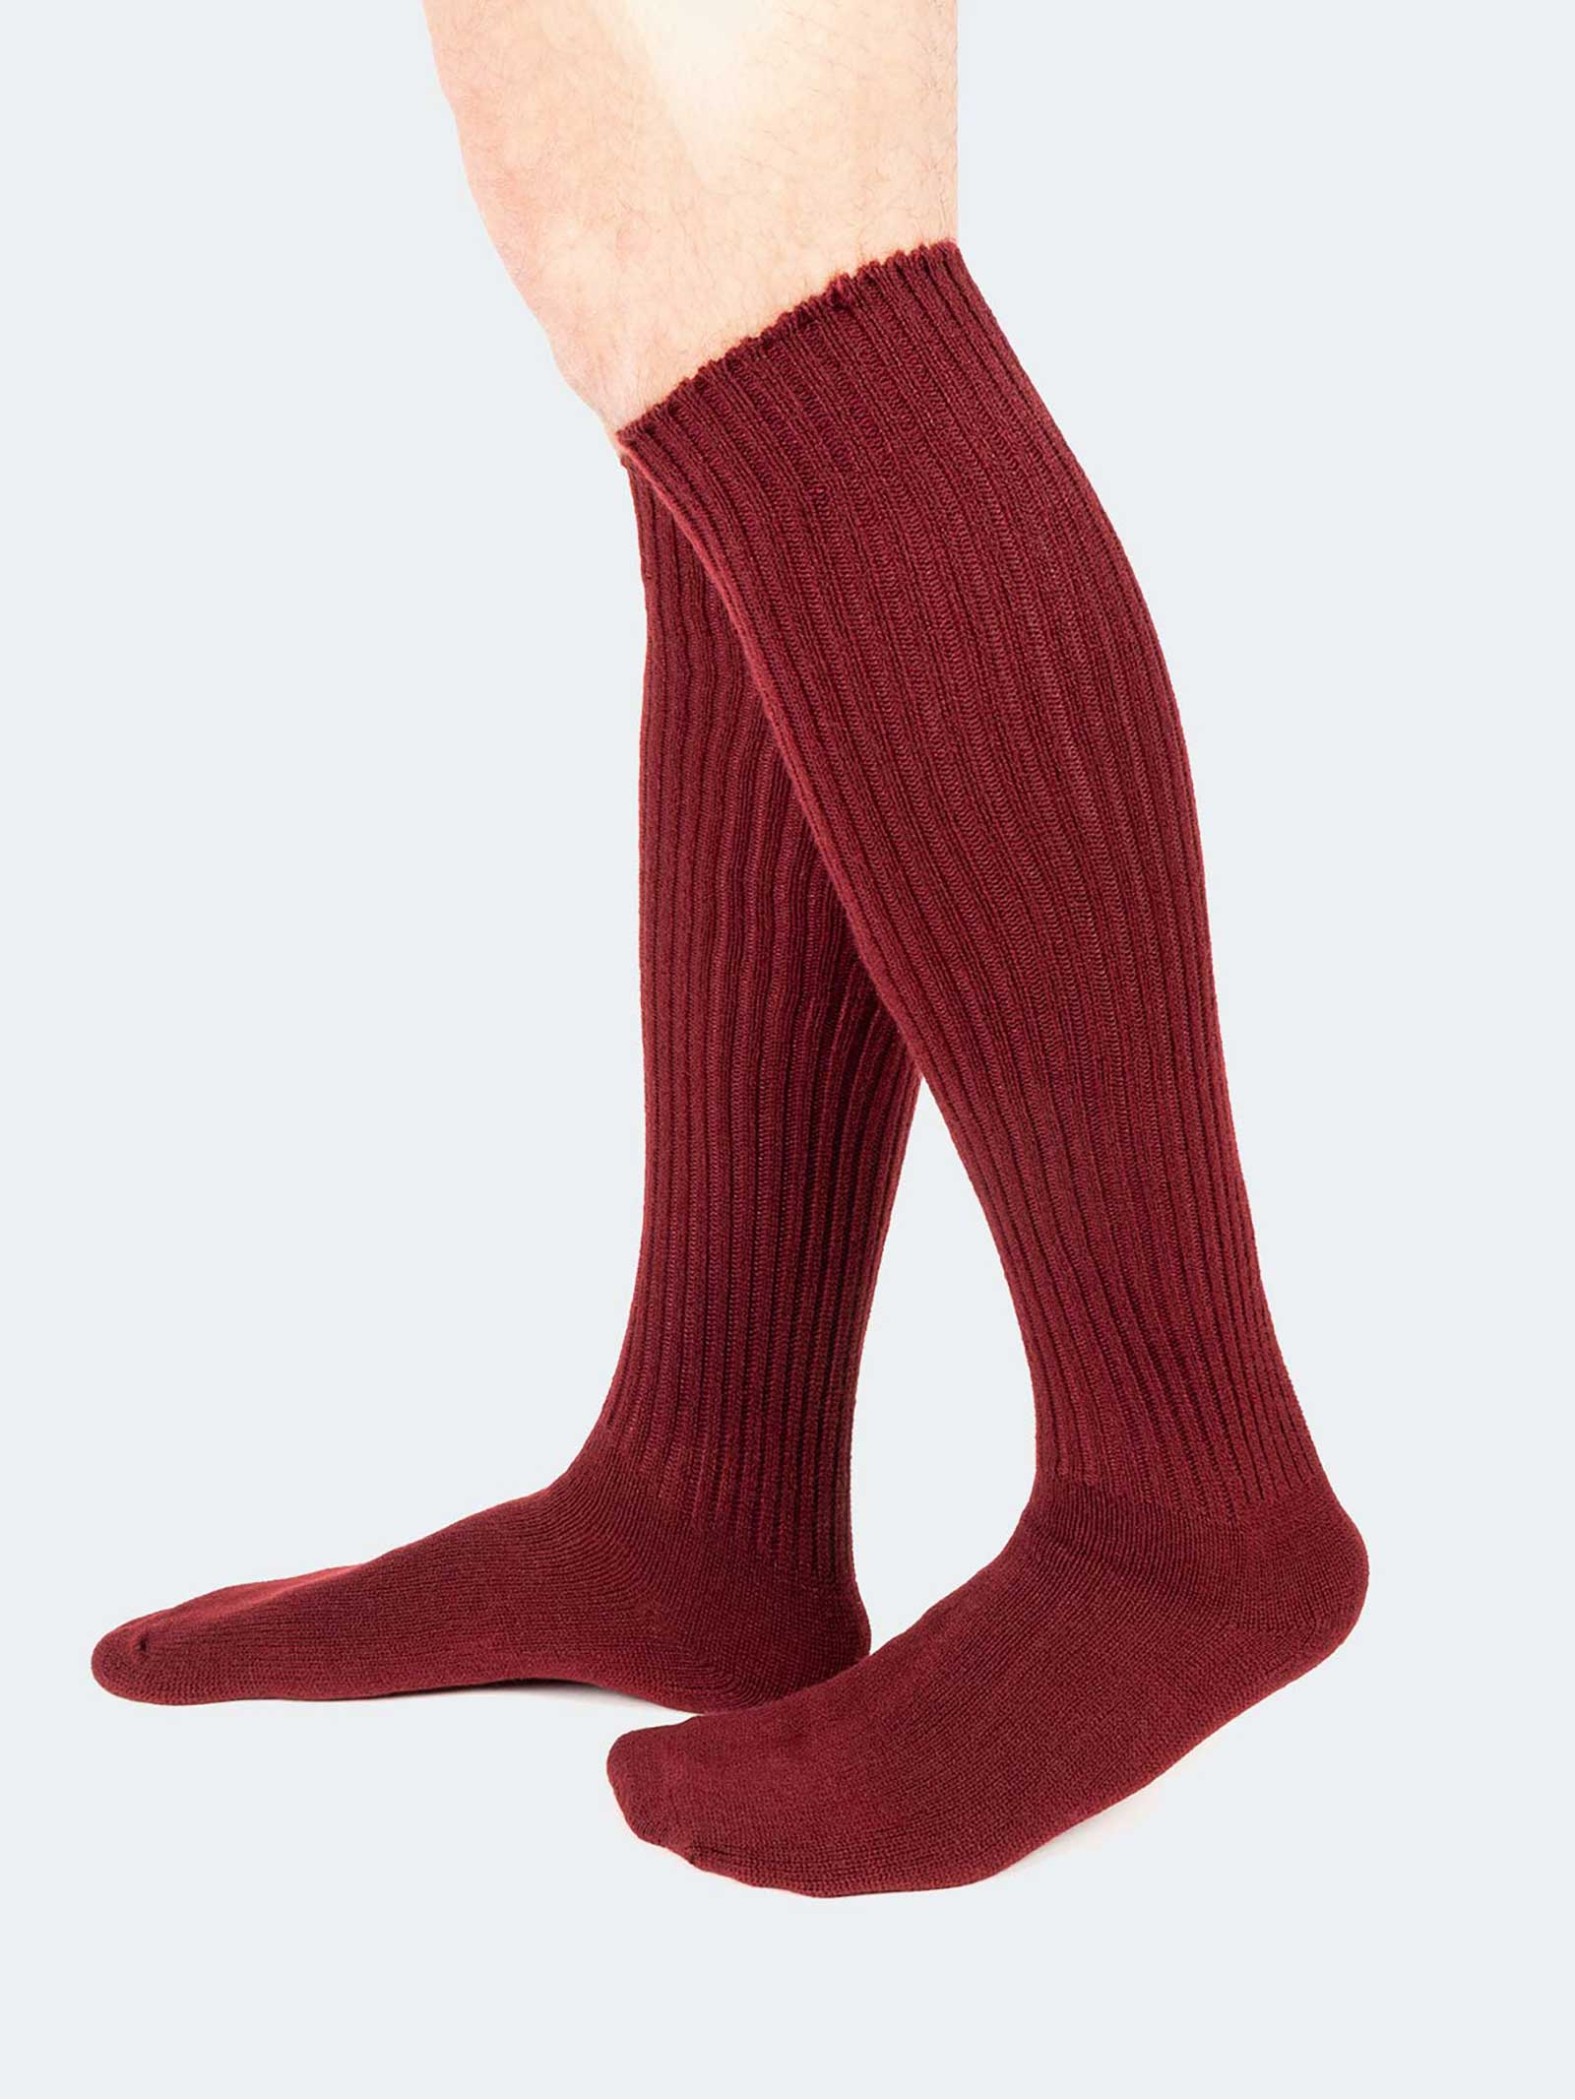 Soft Knee high socks - Made in italy